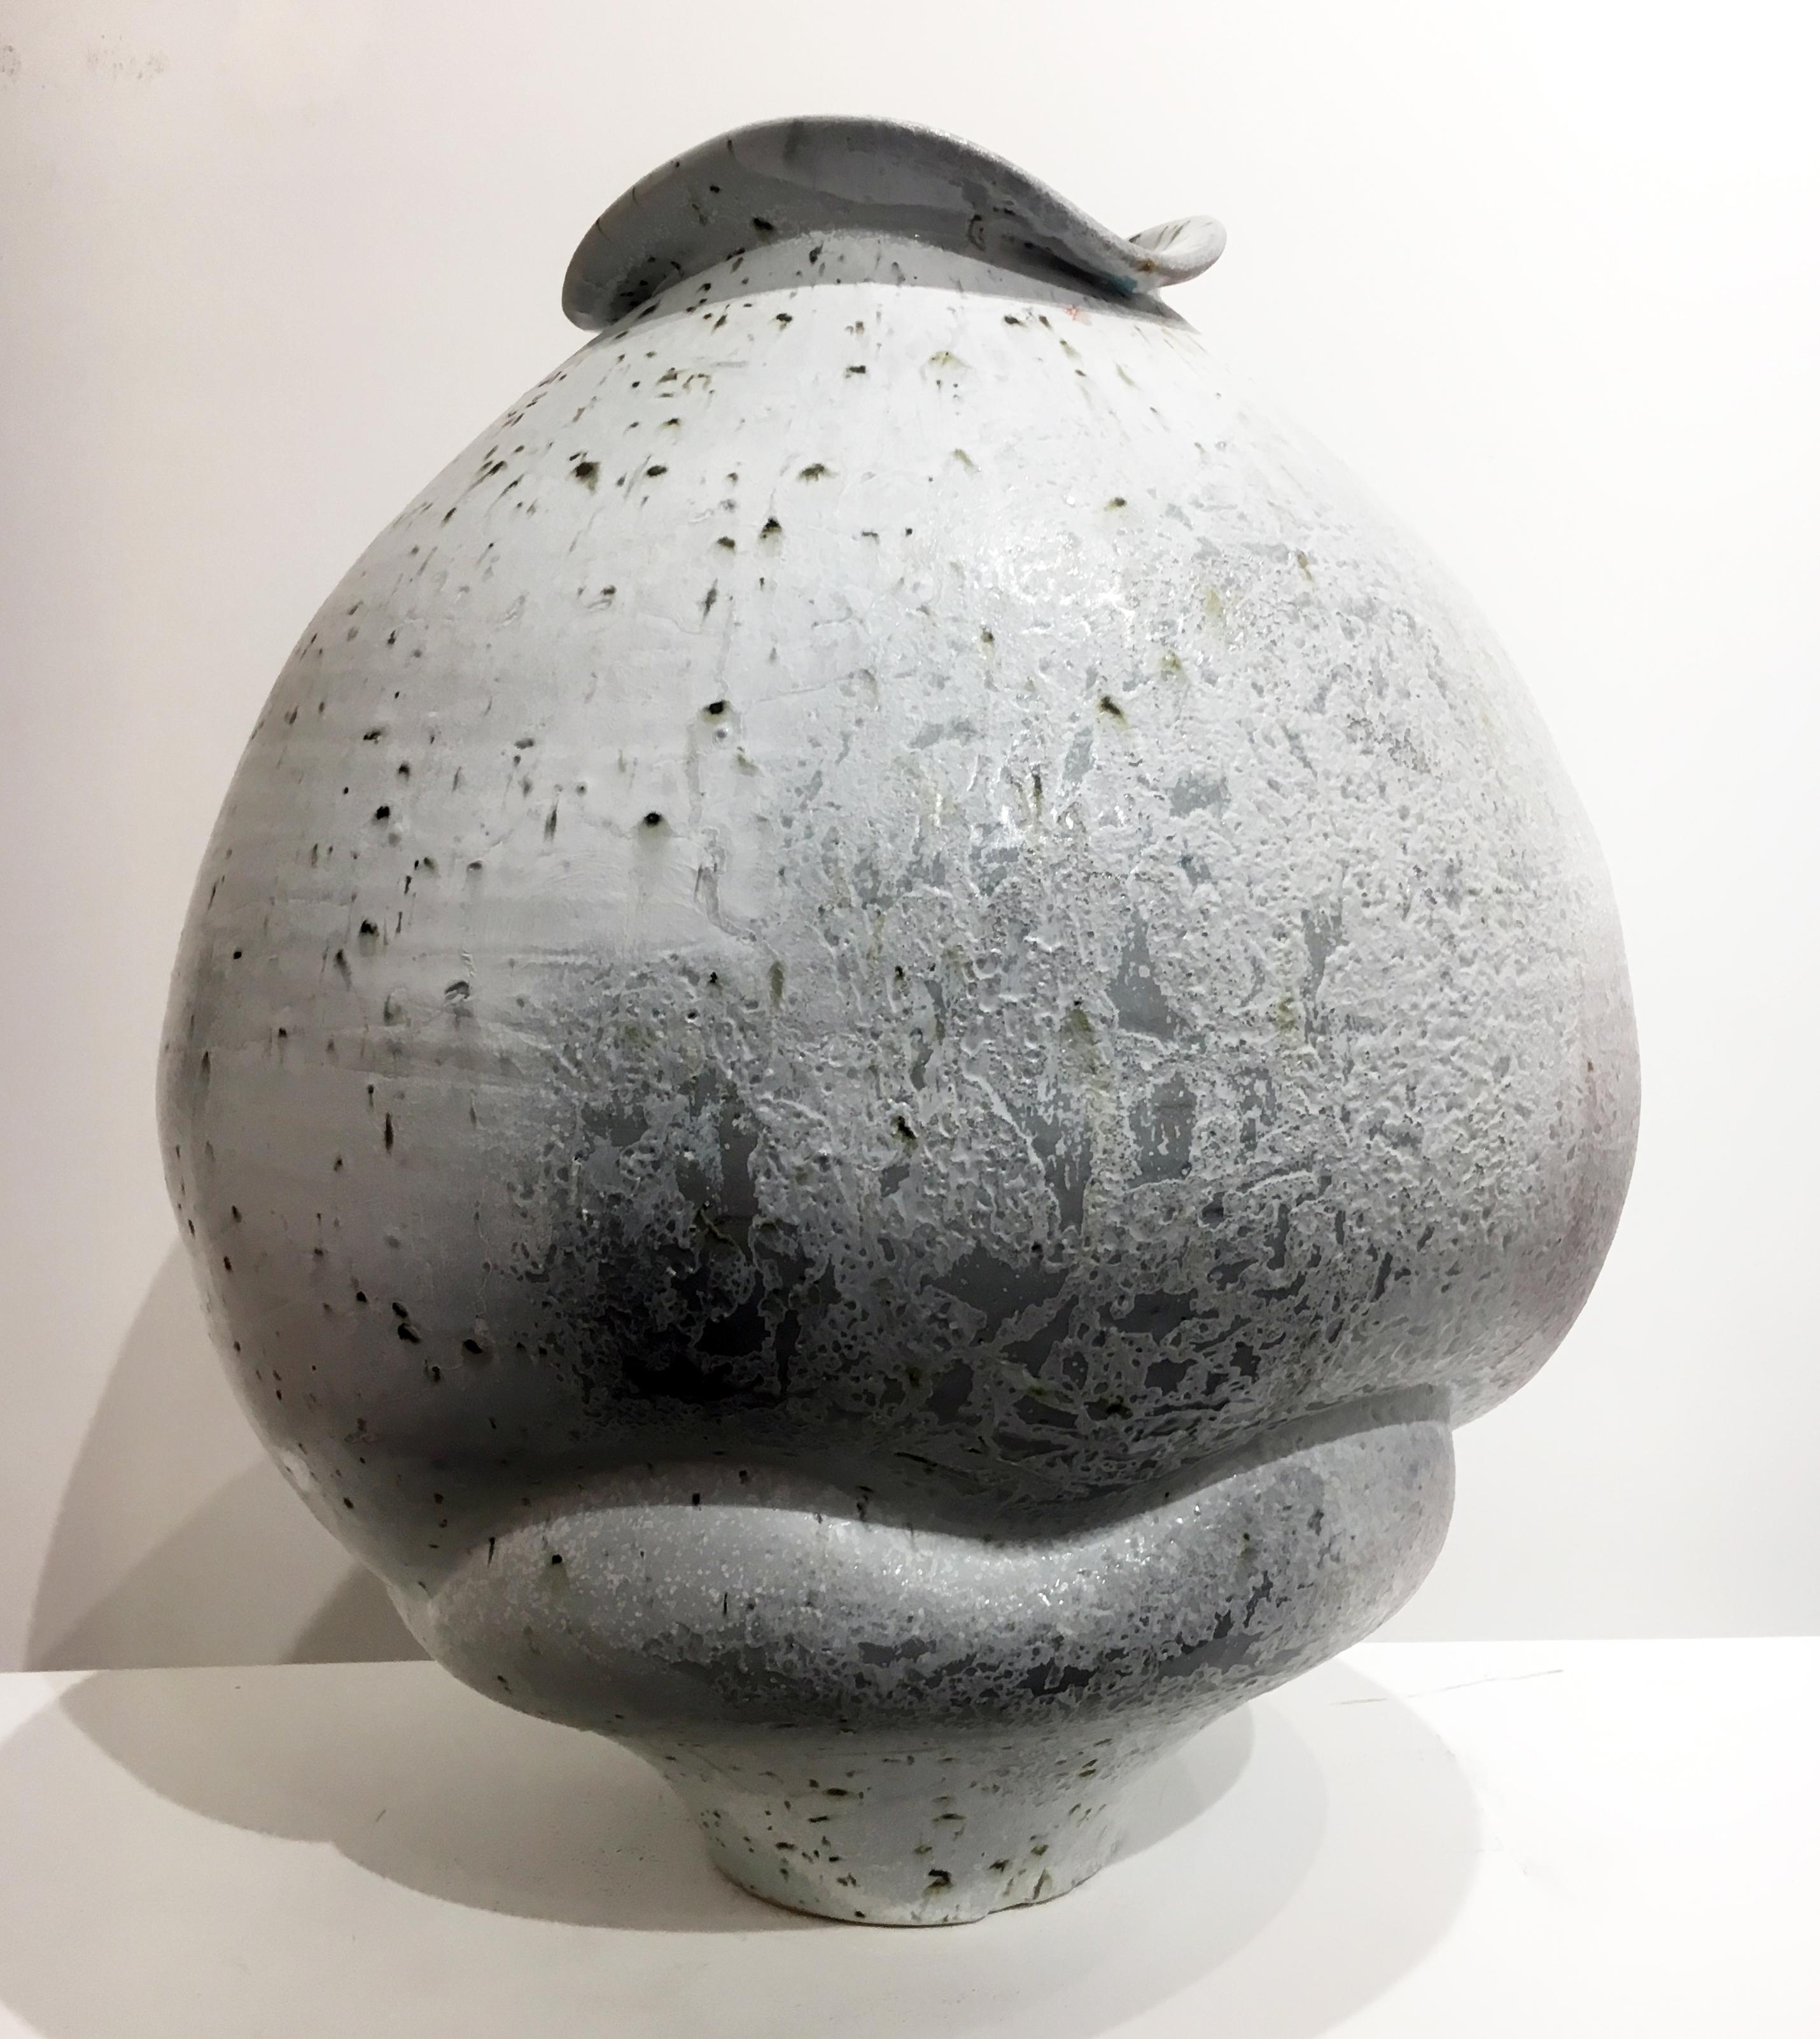 Perry Haas is a ceramic artist making functional pottery and focusing on wood-firing techniques. Drawing from a love for the wood-fired ceramic surface, Perry looks to anticipate the manner in which ash in the kiln will collect in different arrays